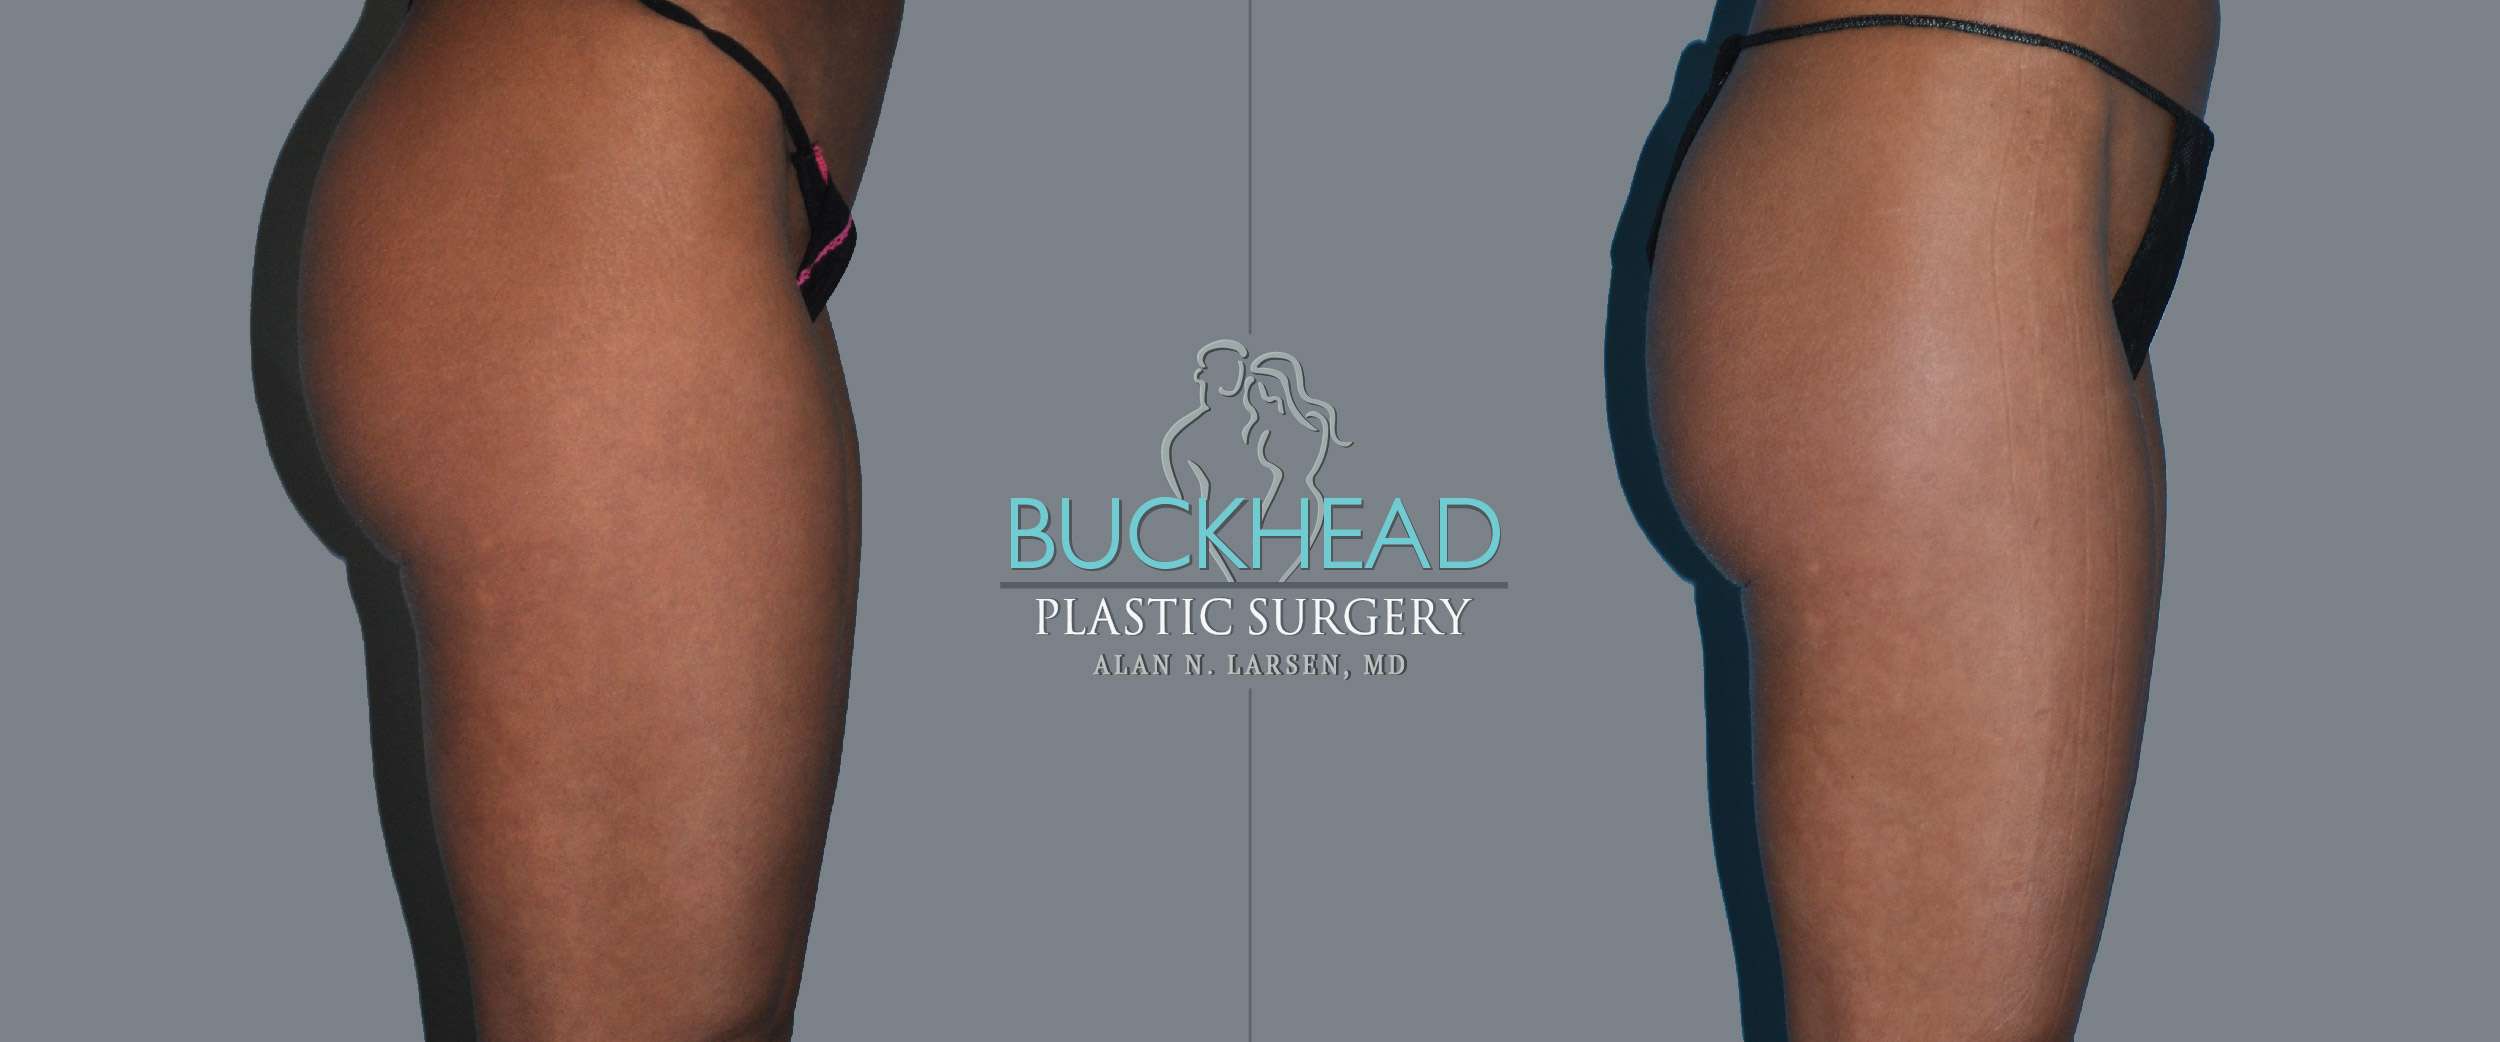 Before and After Photo Gallery | Liposuction - Thigh Back | Buckhead Plastic Surgery | Alan N. Larsen, MD | Double Board-Certified Plastic Surgeon | Atlanta GA